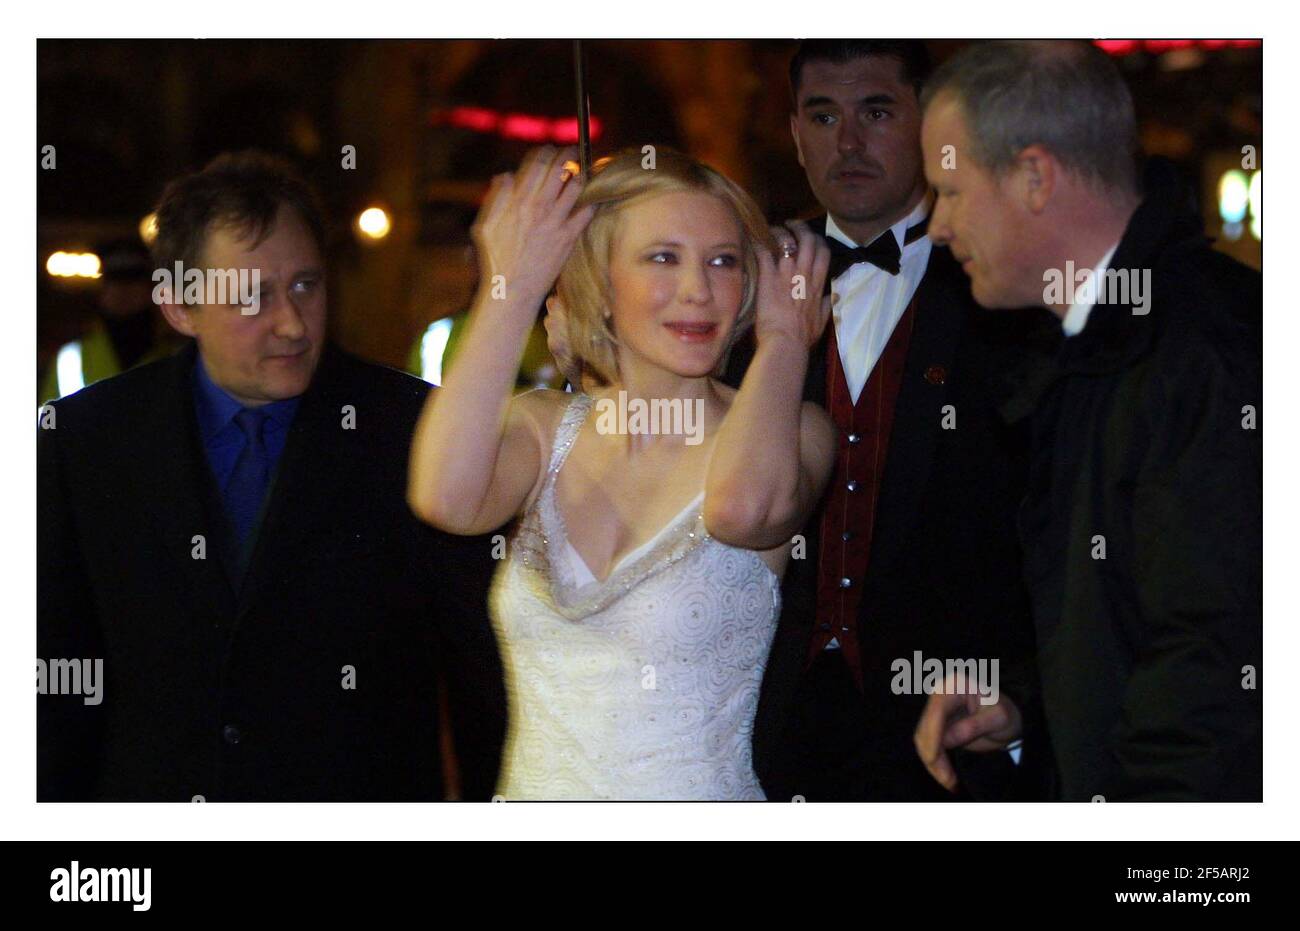 Premier of CHARLOTTE GRAY Cate Blanchett the STAR arrives at the Odeon Leicester Square.pic David Sandison 19/2/2002 Stock Photo